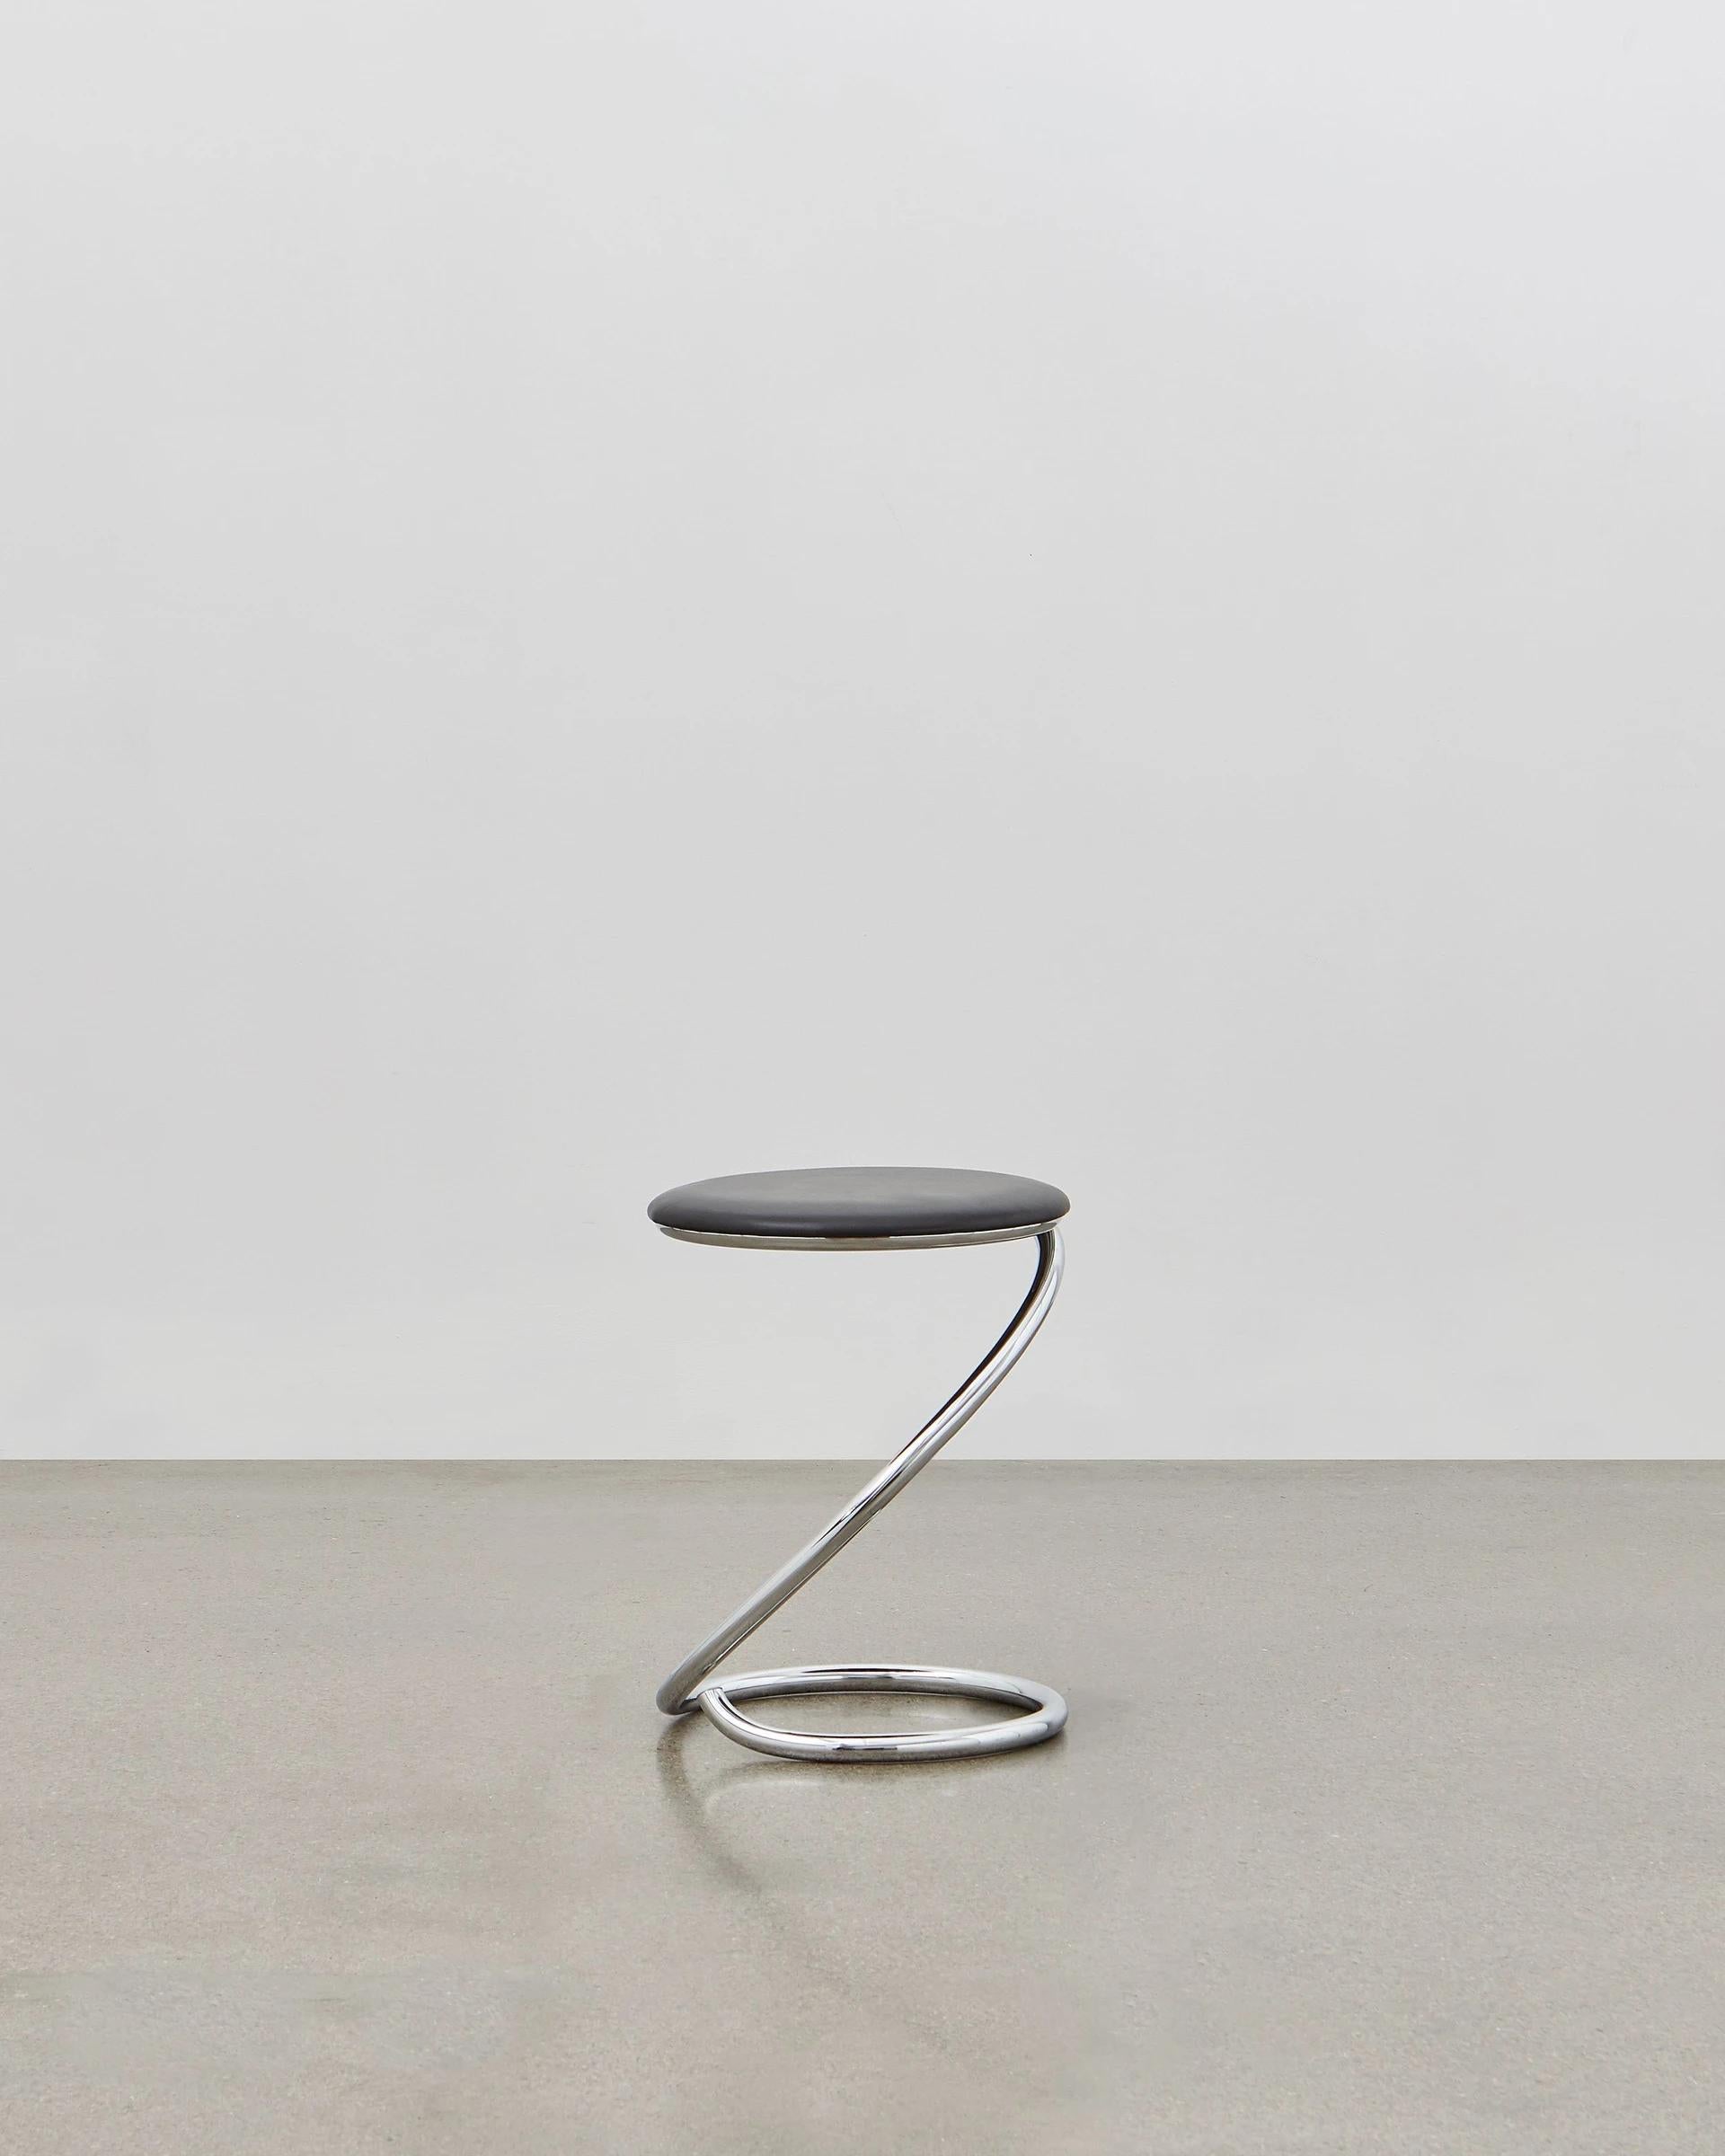 The PH snake stool is completely true to the original design and the use of chromed steel tubes, however updated for the 21st century to be available with wood seating in five colorways to coordinate with the ever-popular Poul Henningsen lighting